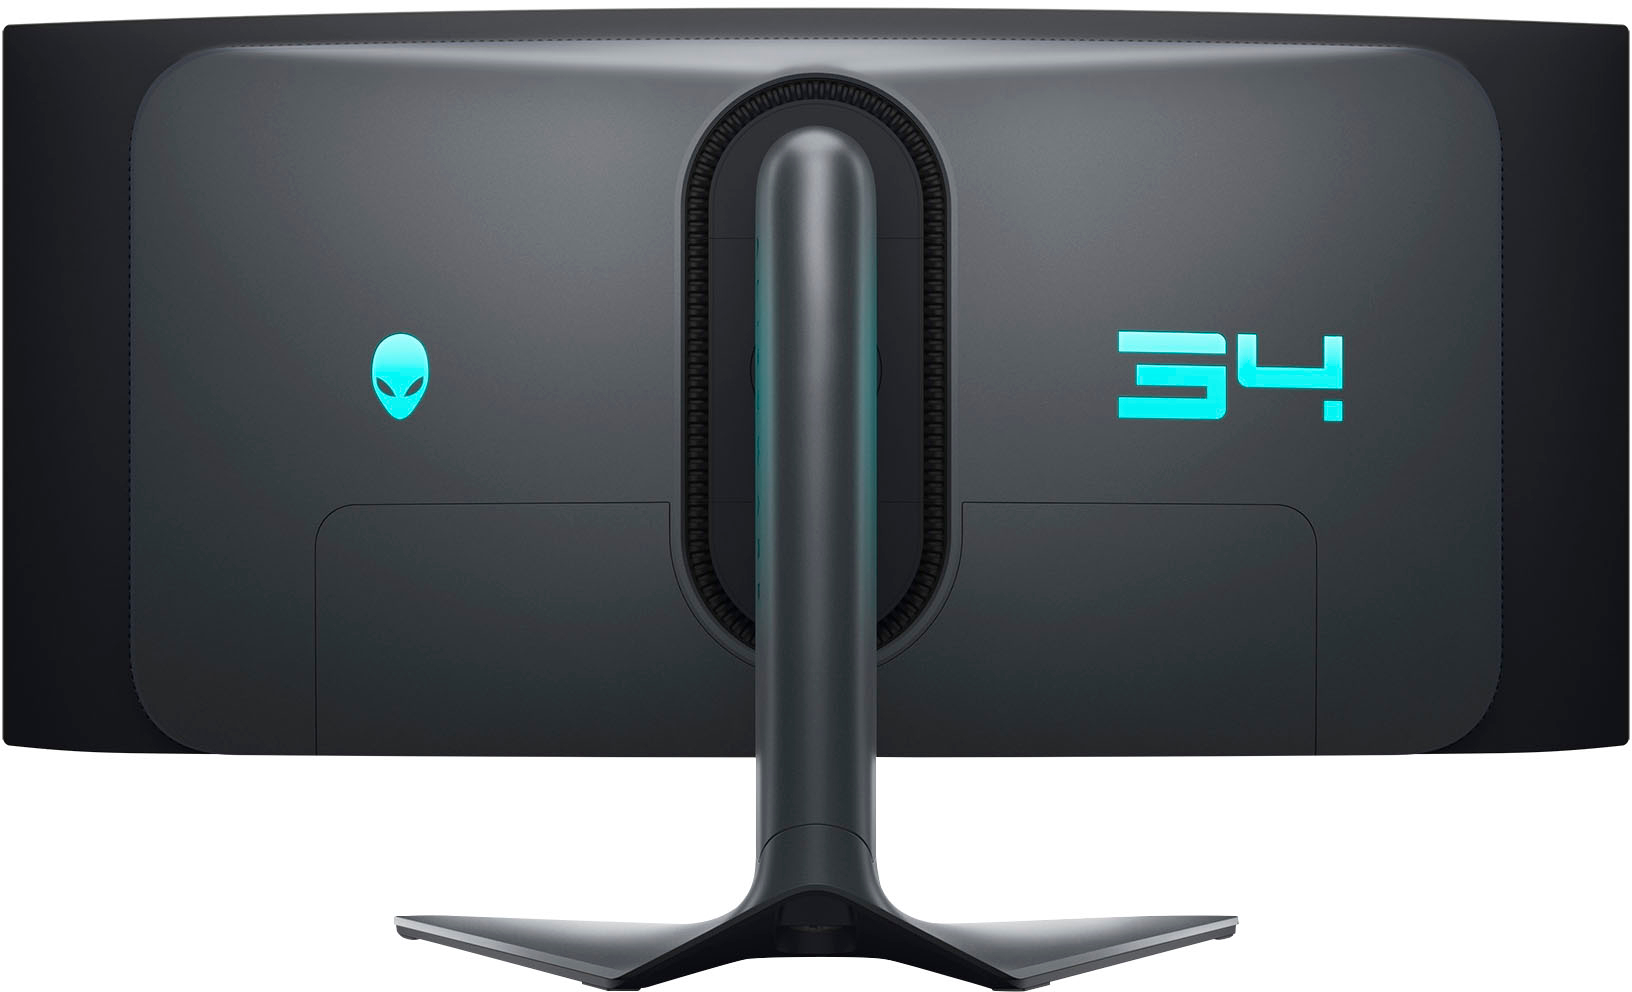 Asus' Fancy New OLED Gaming Monitor Is Available To Preorder Exclusively At  Newegg - GameSpot